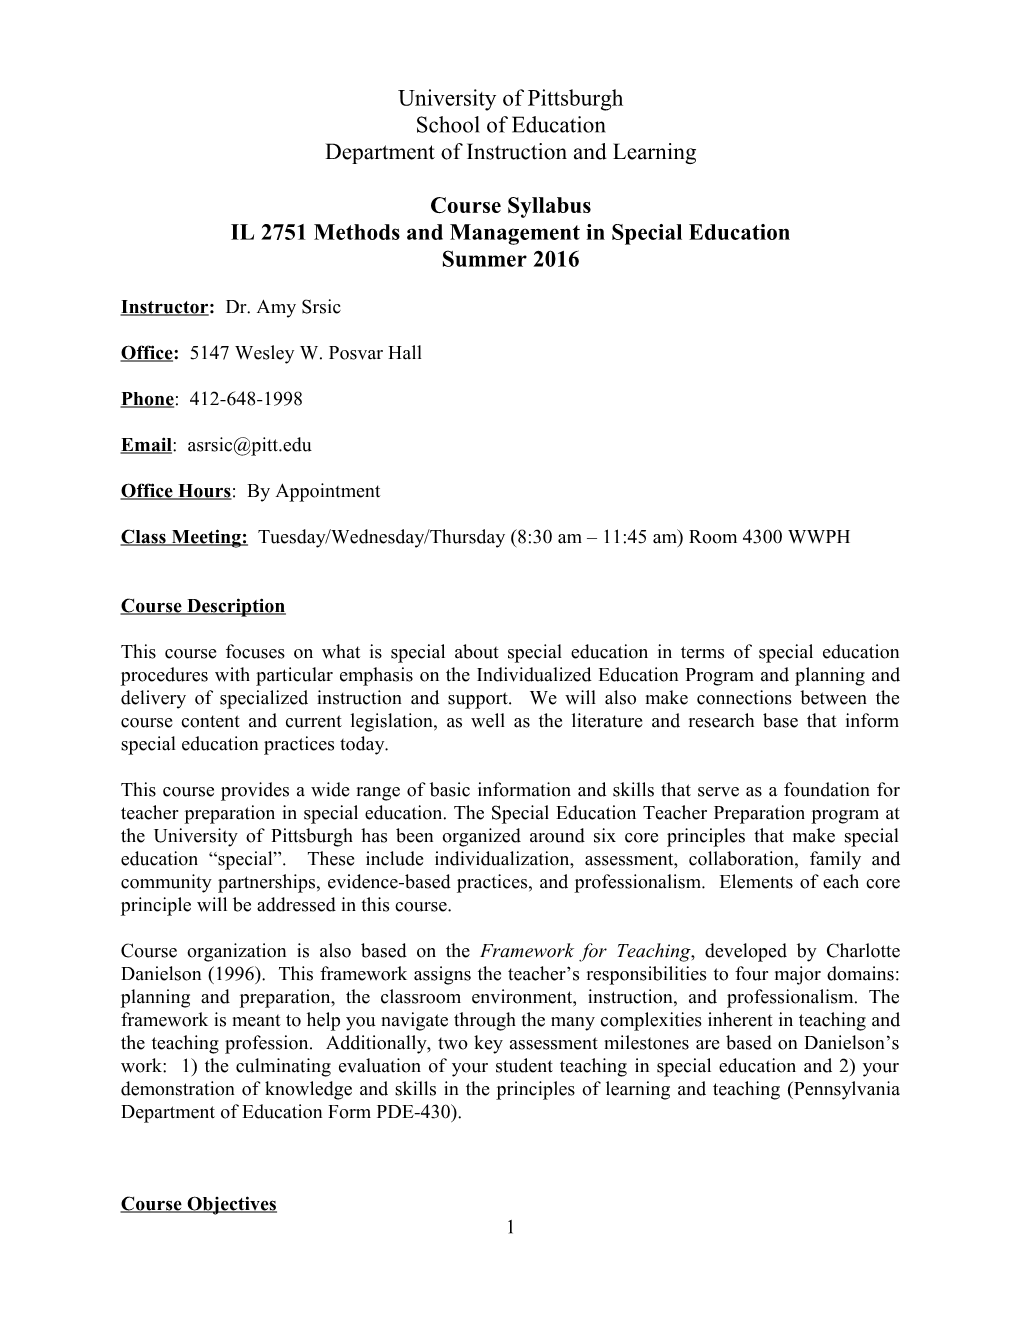 IL 2751 Methods and Management in Special Education